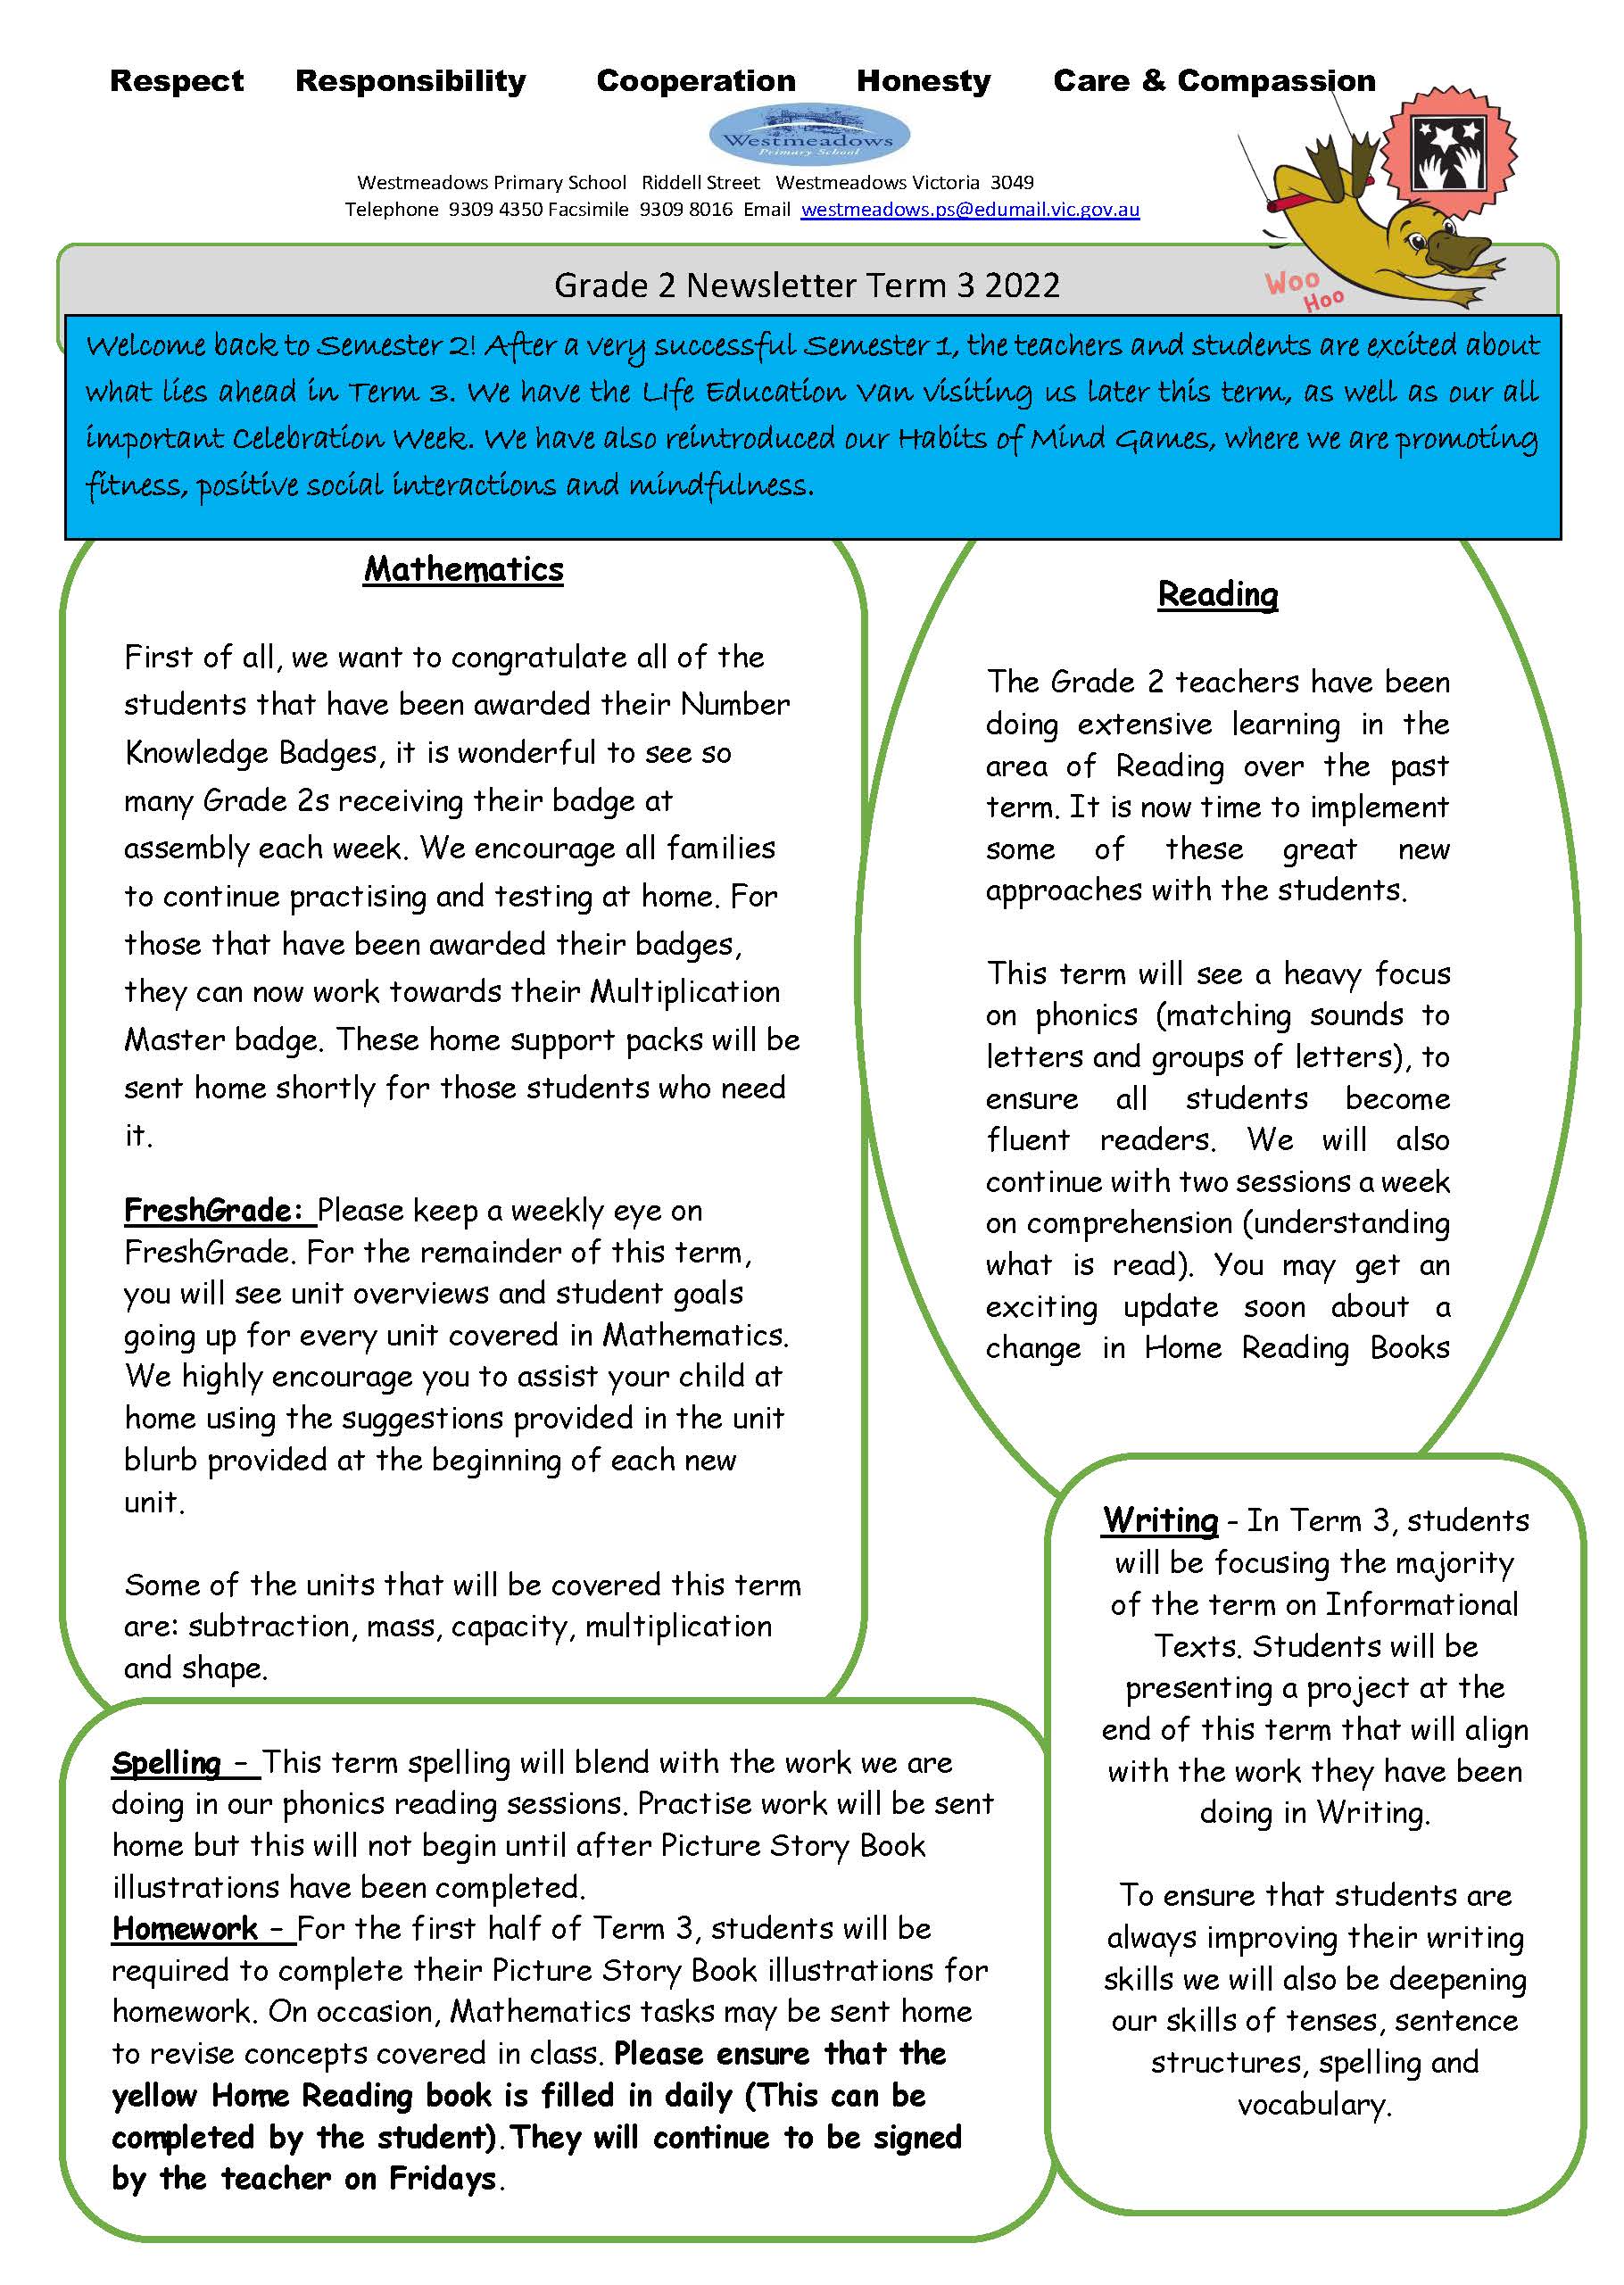 Grade 2 Term 3, 2022 Newsletter_Page_1